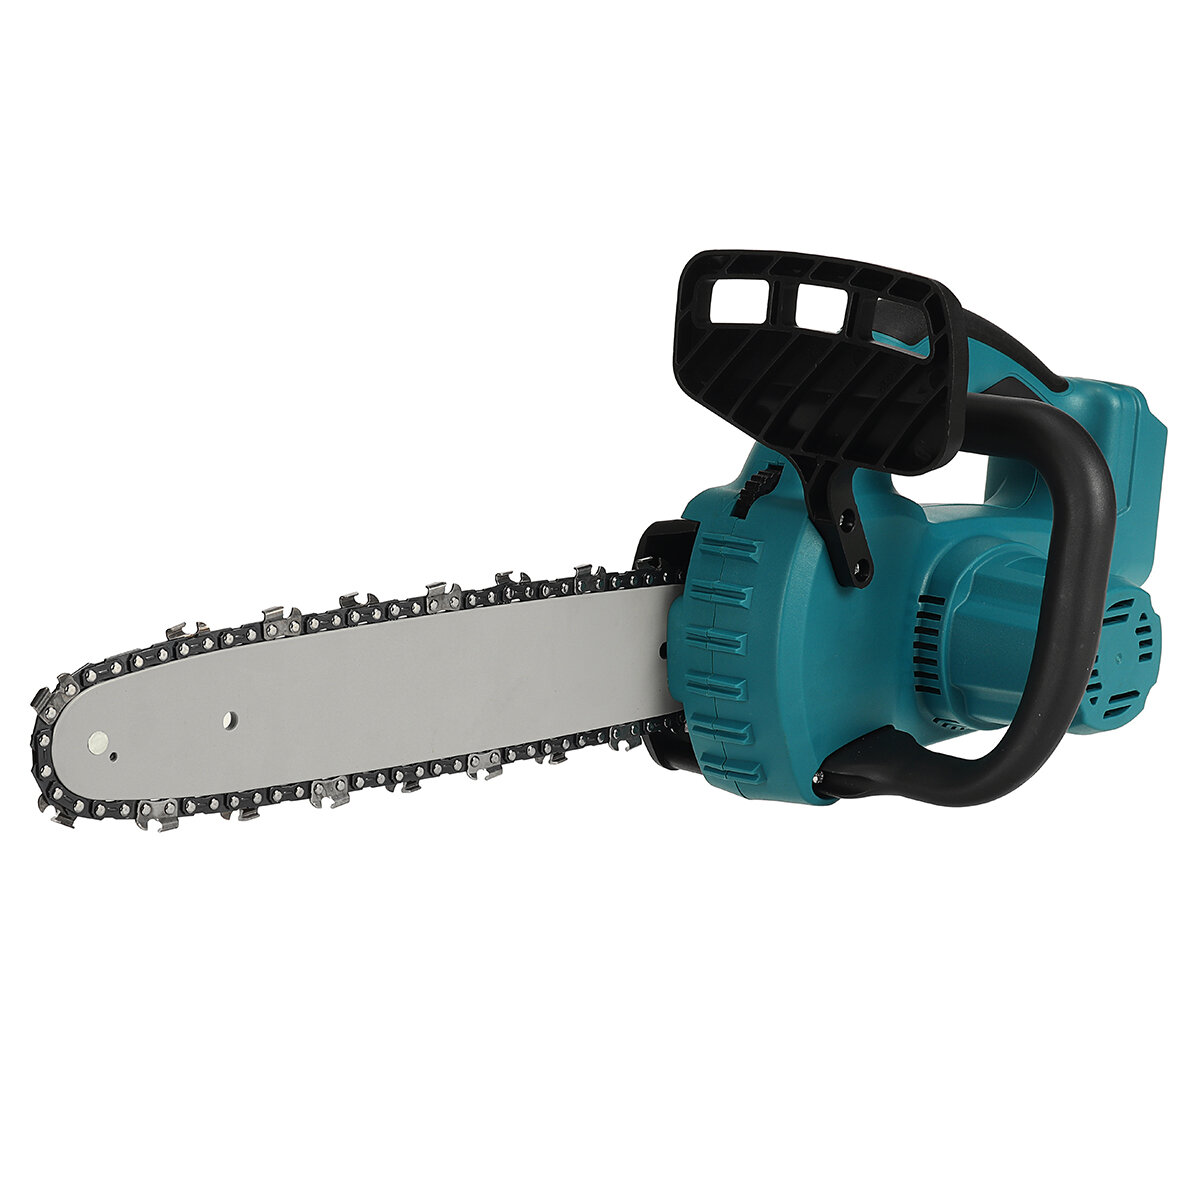 388VF 5000W 12 Inch Portable Electric Chain Saw Pruning Chain Saw Rechargeable Woodworking Power Too